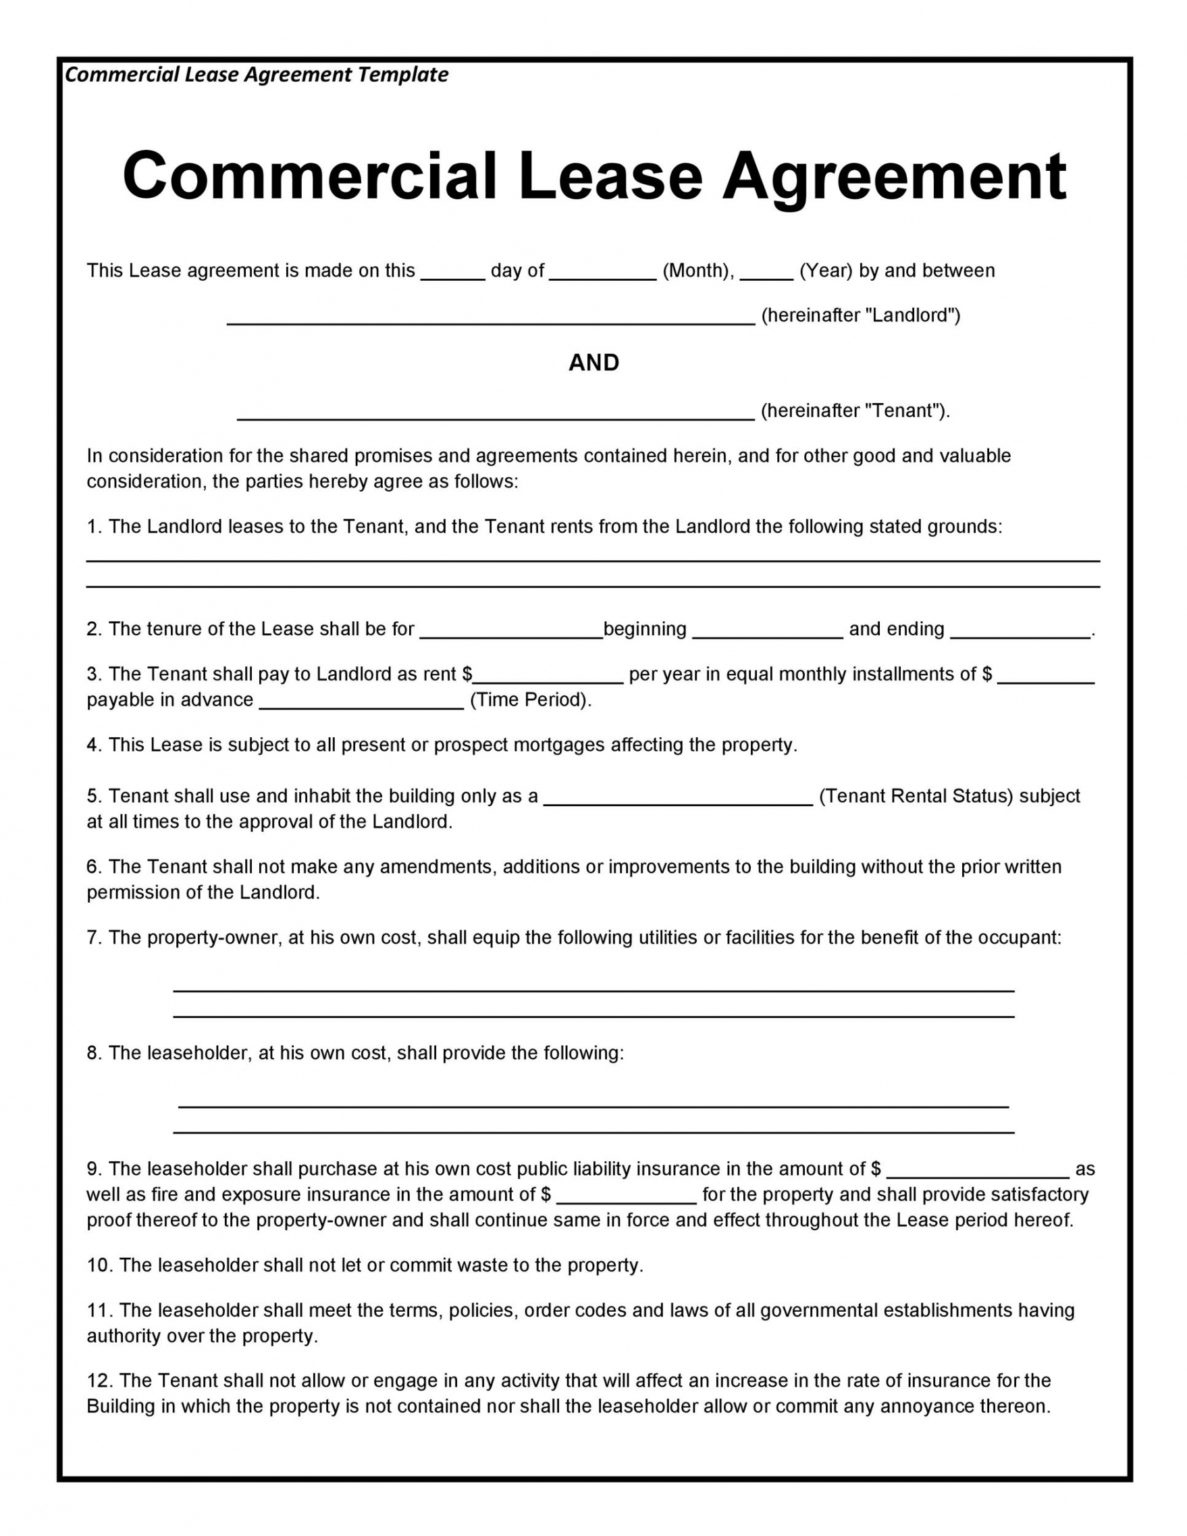 Free 26 Free Commercial Lease Agreement Templates ᐅ Templatelab Private